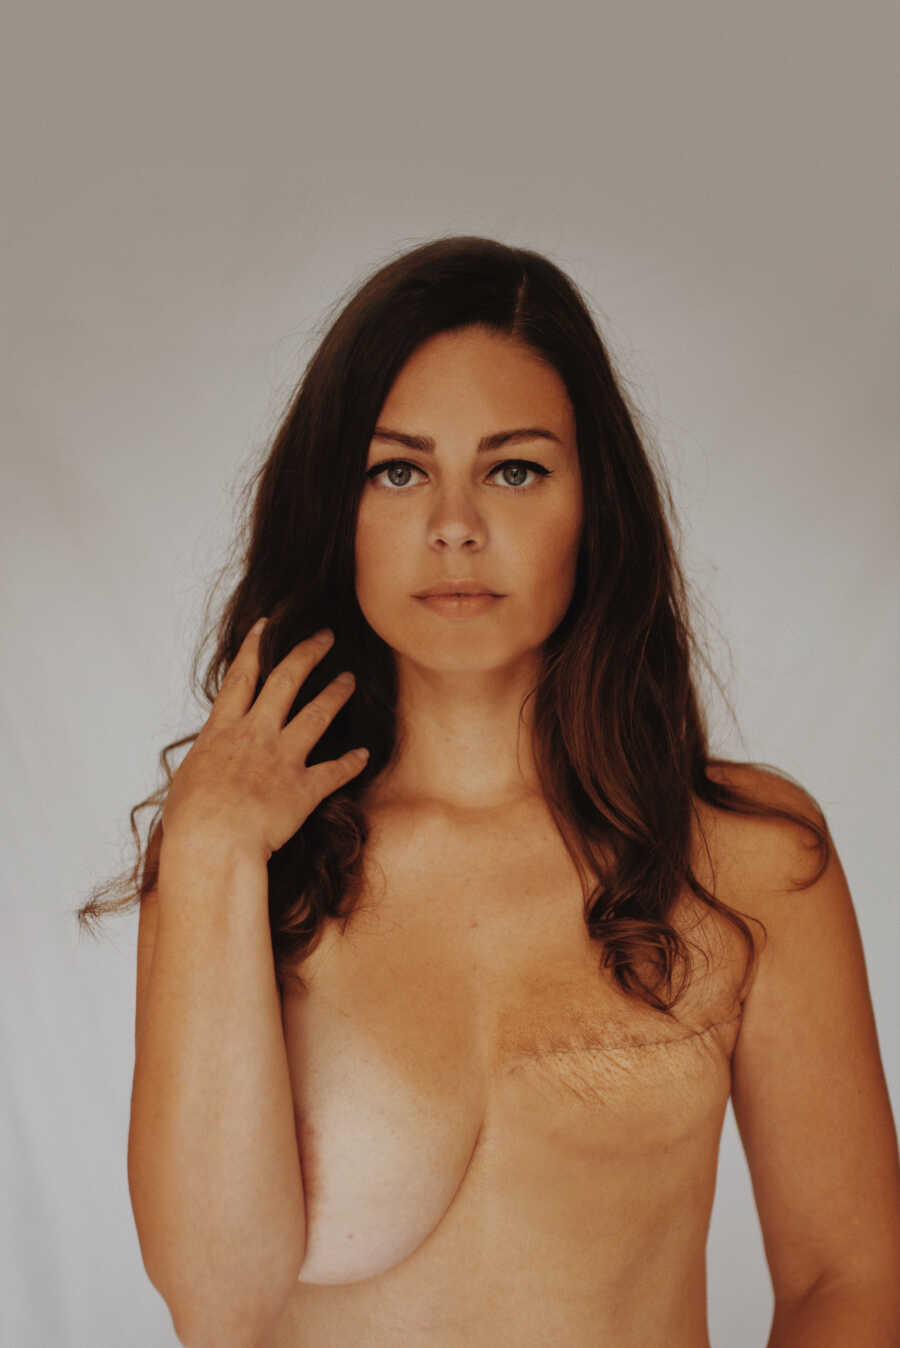 Brunette woman showing mastectomy scar